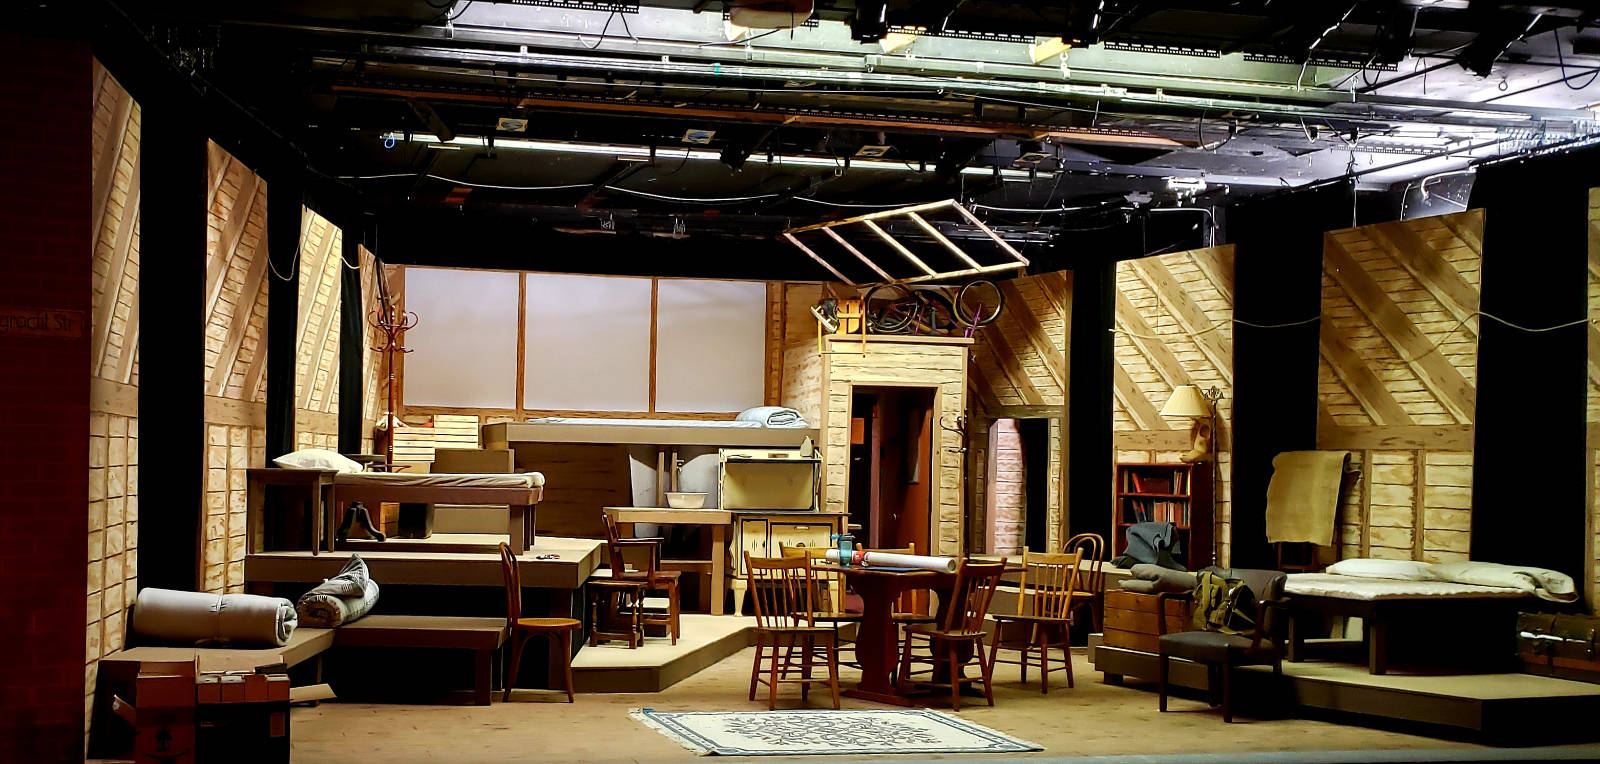 17657502_web1_Mainstage-sets2-annefrank2-17july19_5114